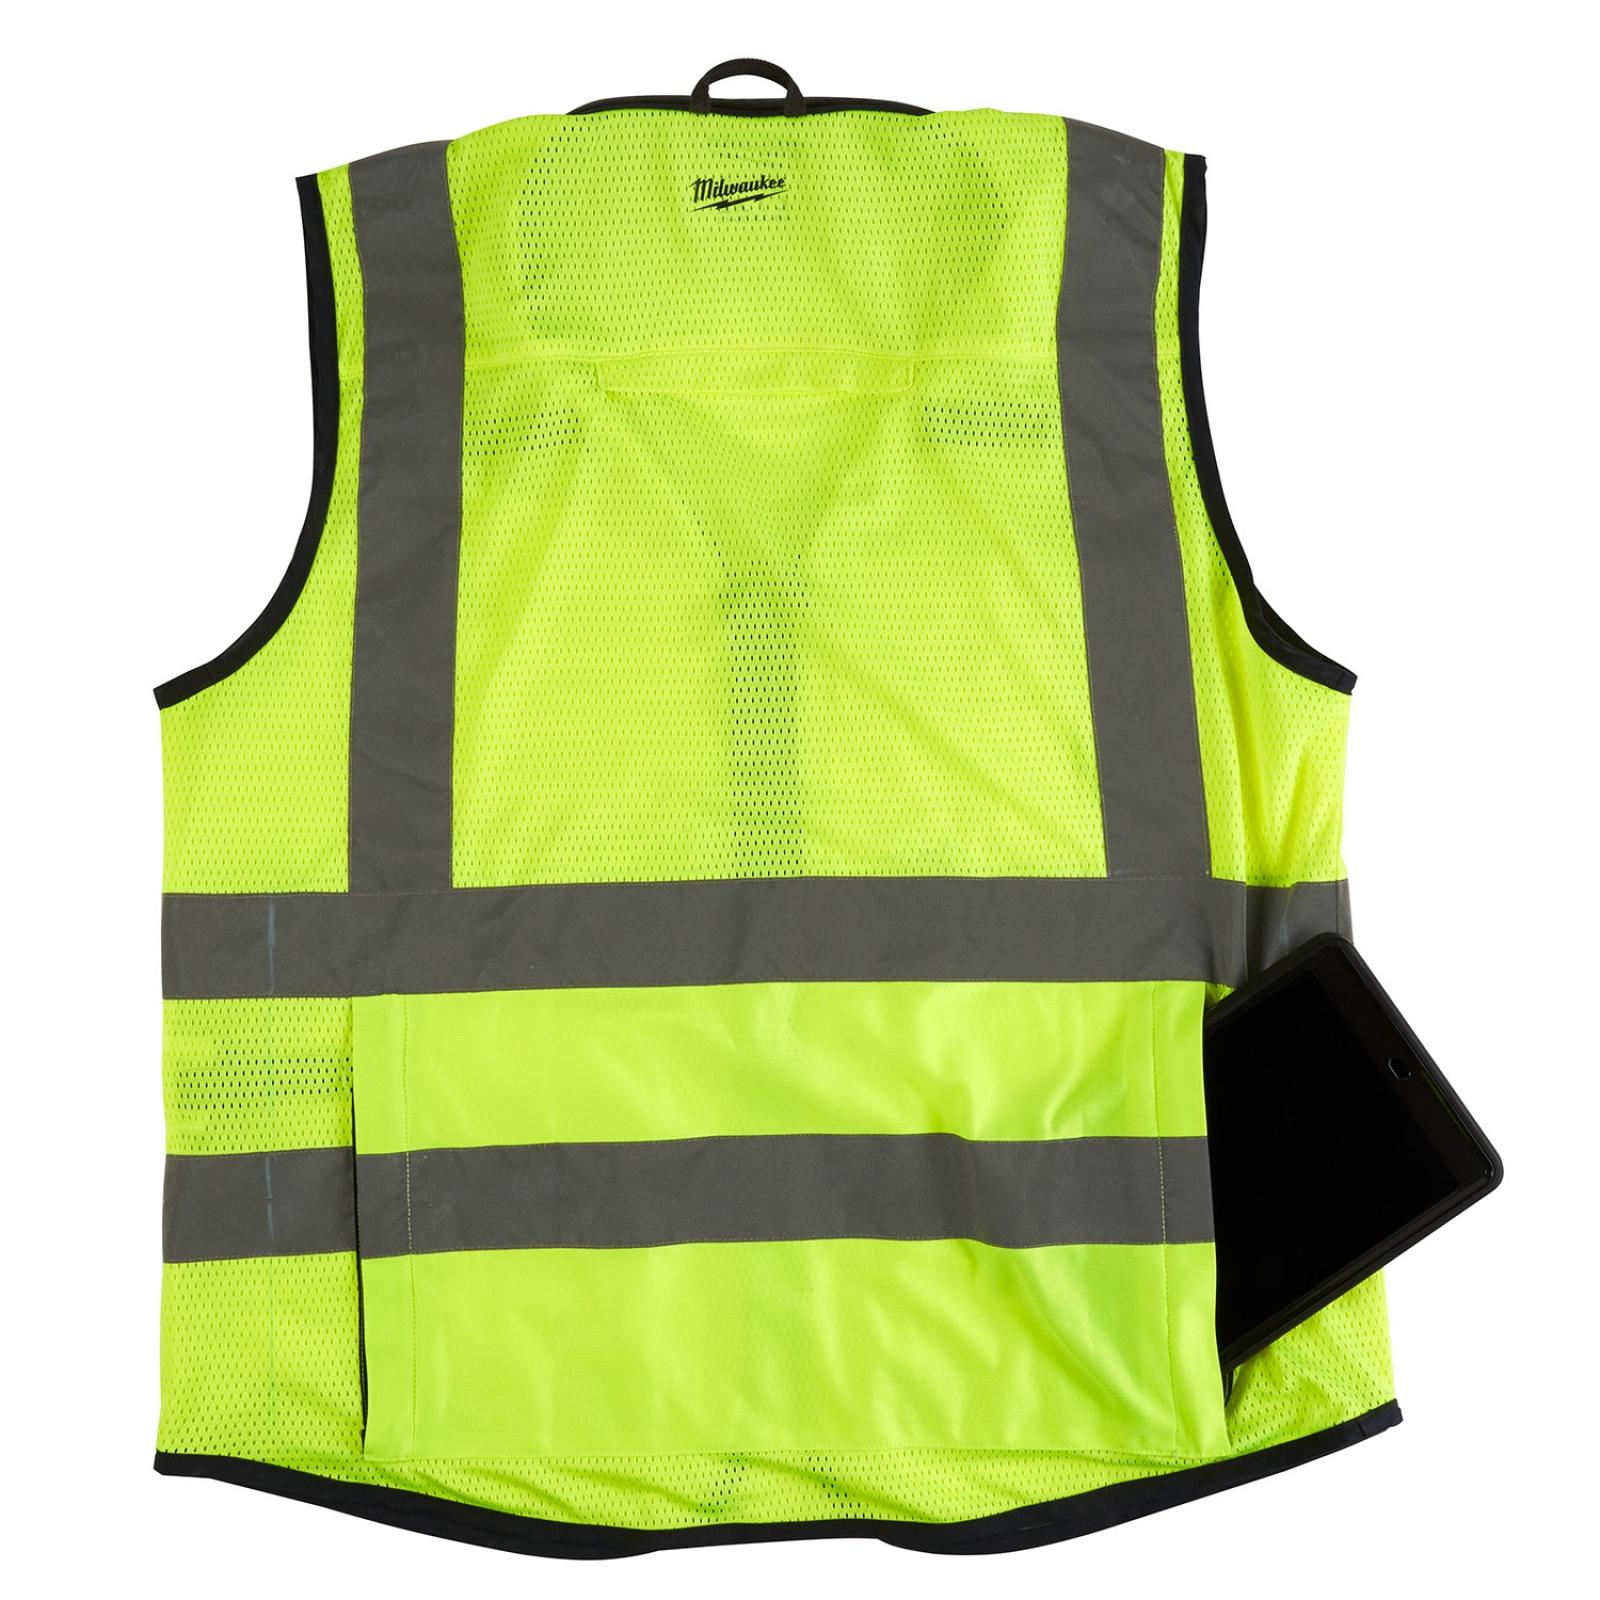 Milwaukee Class 2 High-Visibility Performance Safety Vests